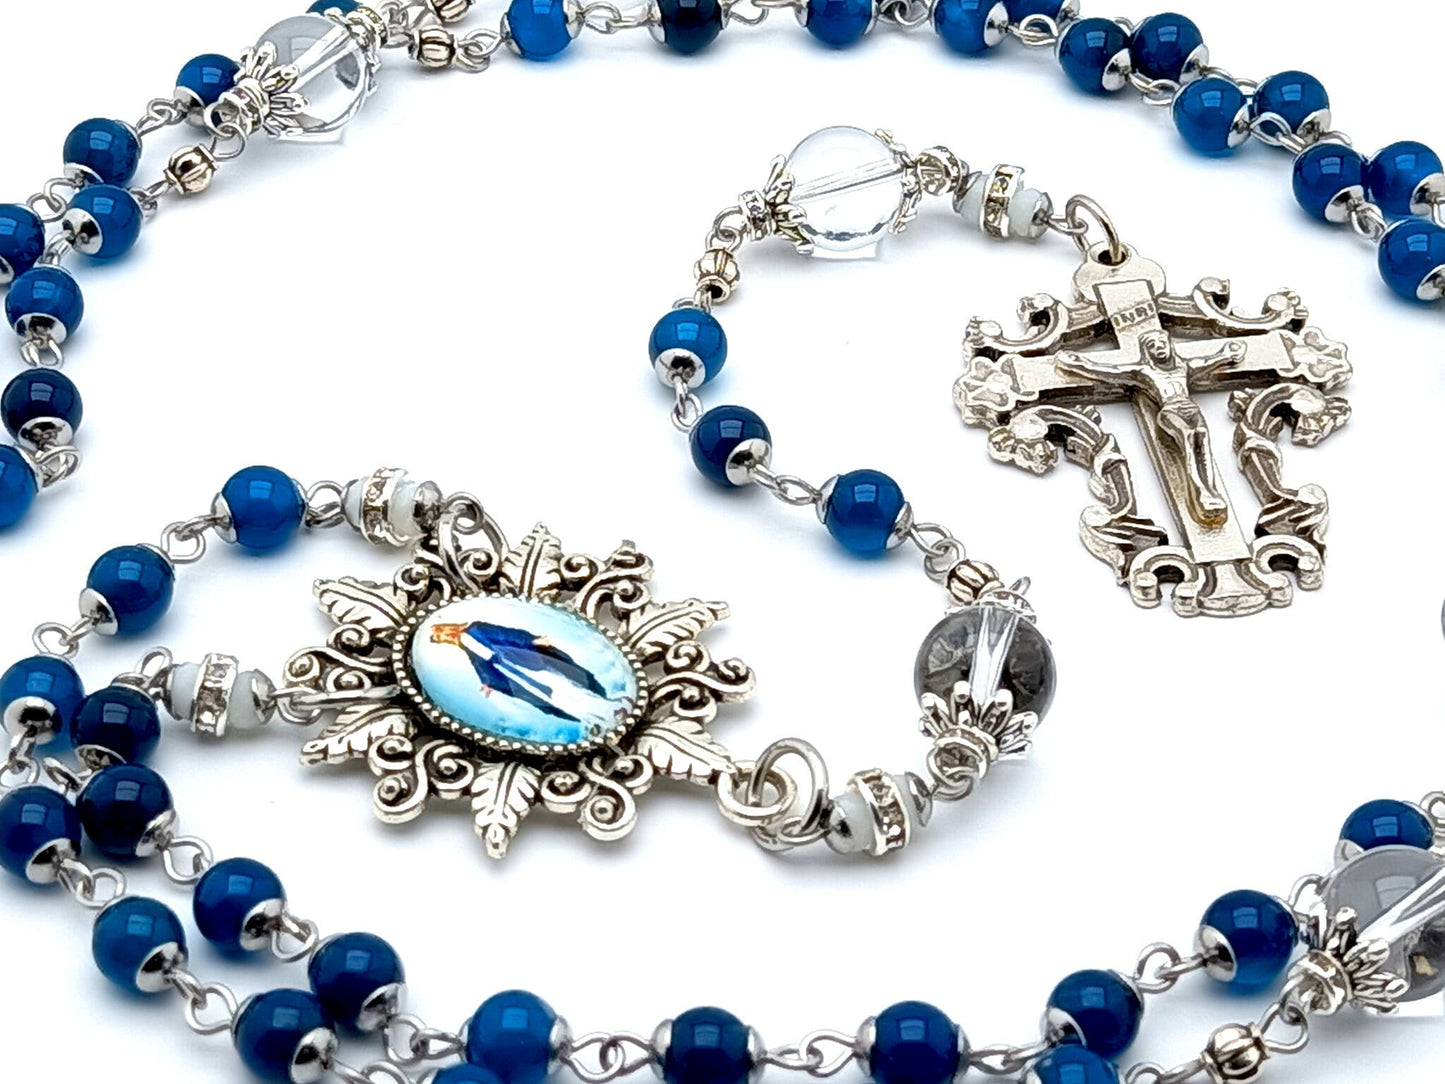 Our Lady of Grace unique rosary beads with blue agate and crystal gemstone beads, filigree crucifix and picture centre medal.